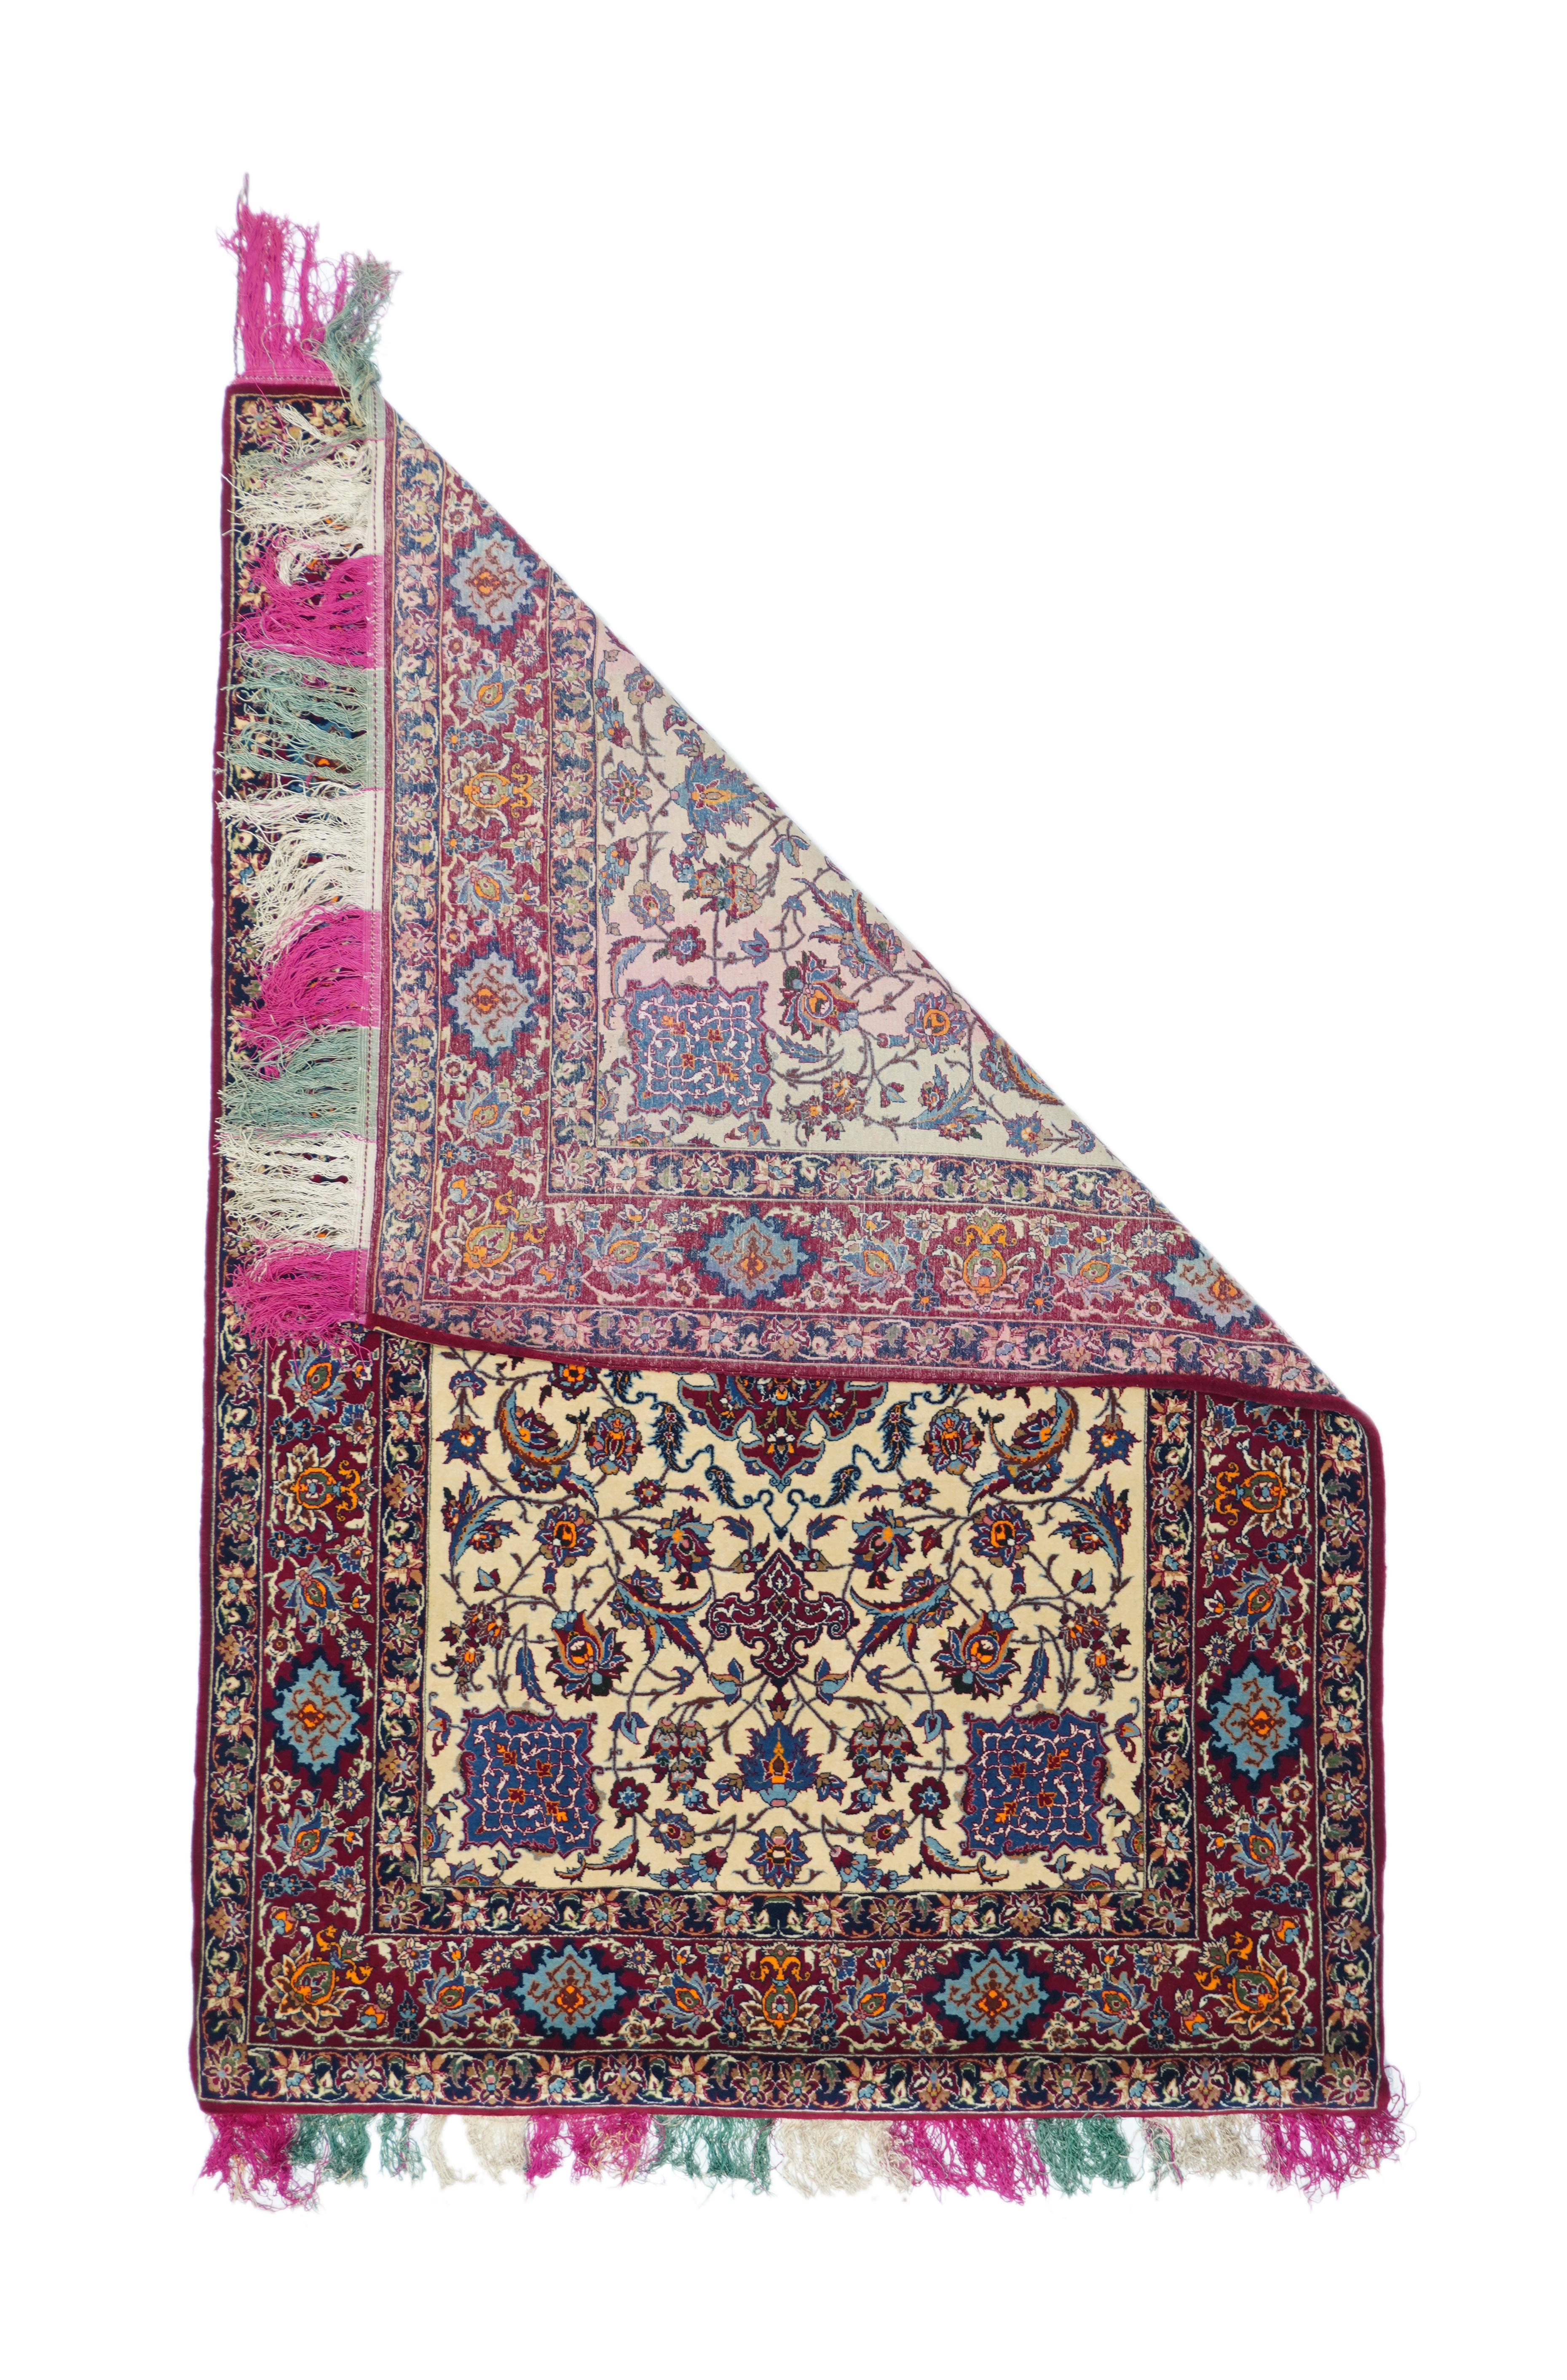 Vintage Isfahan Rug 3.4'' x 5'. This very finely knotted central Persian city workshop small scatter shows a rainbow-colored silk warp. The palette is characteristically modern Isfahan with a cream field, very dark red flaming lozenge medallion and